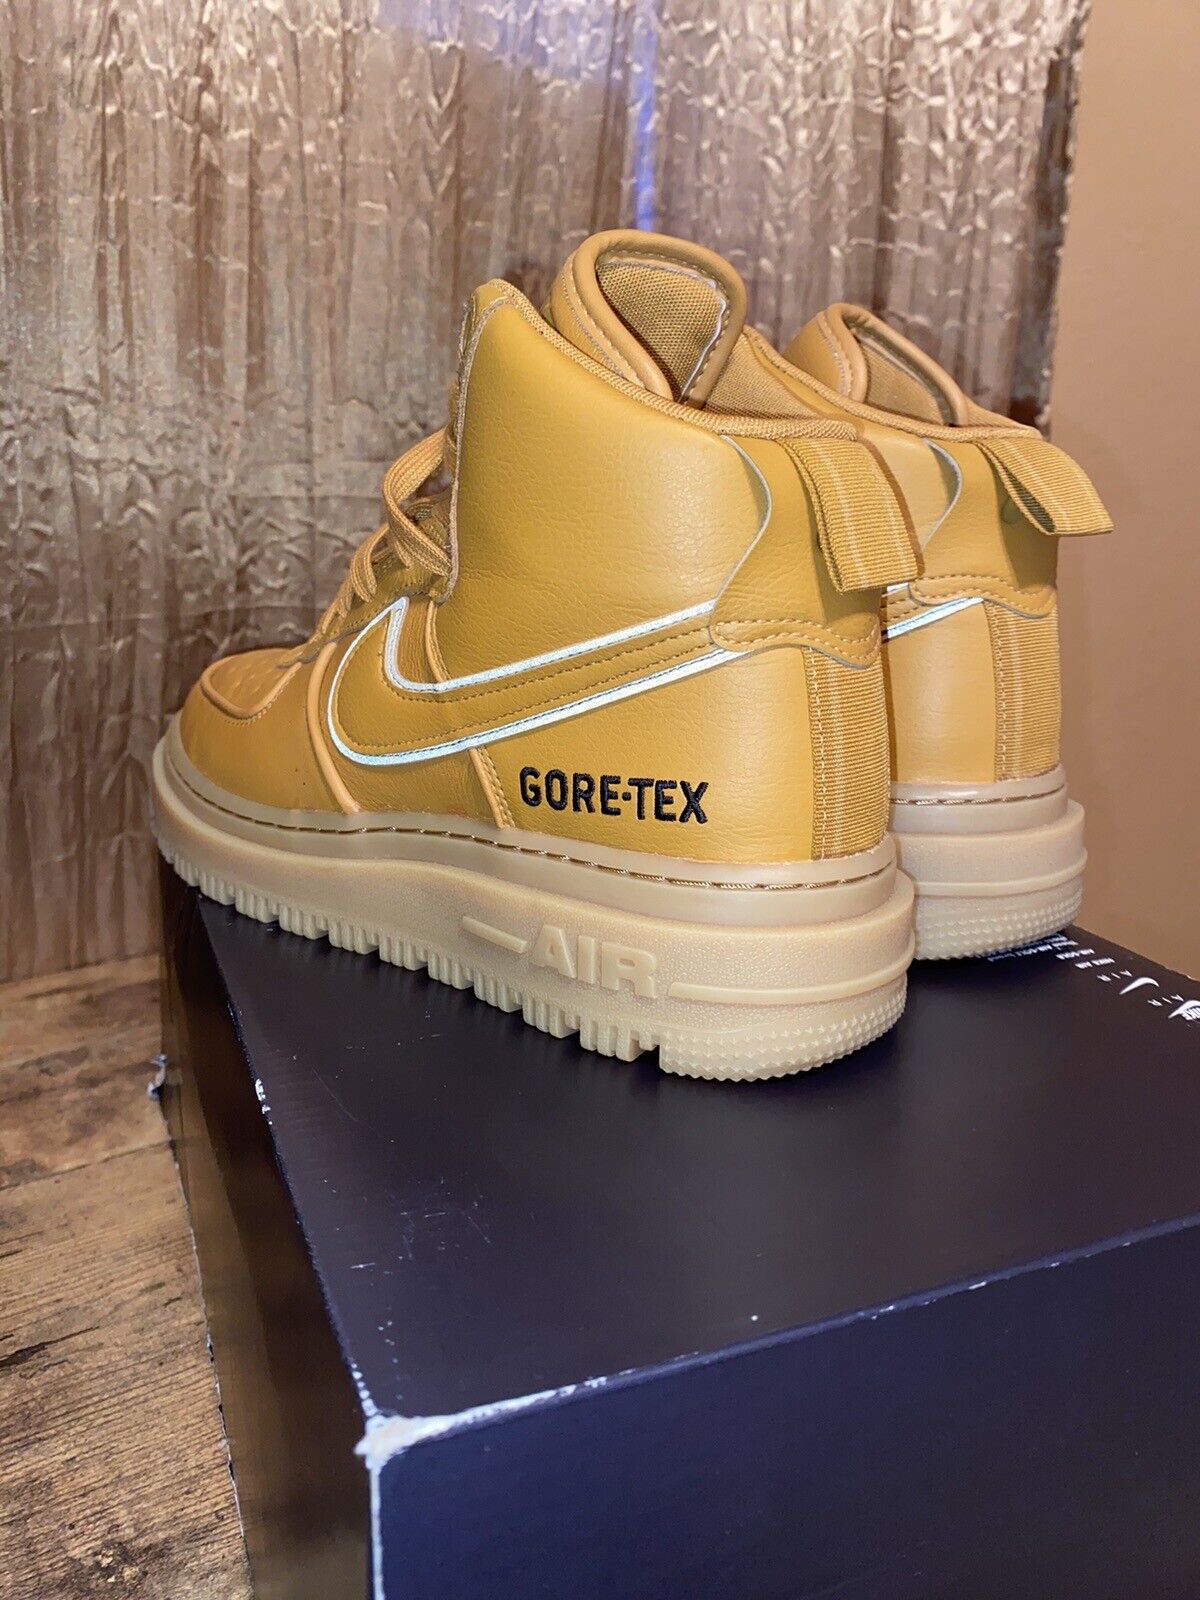 Size 7 - Nike Air Force 1 GTX Goretex Boots 2020 - image 4